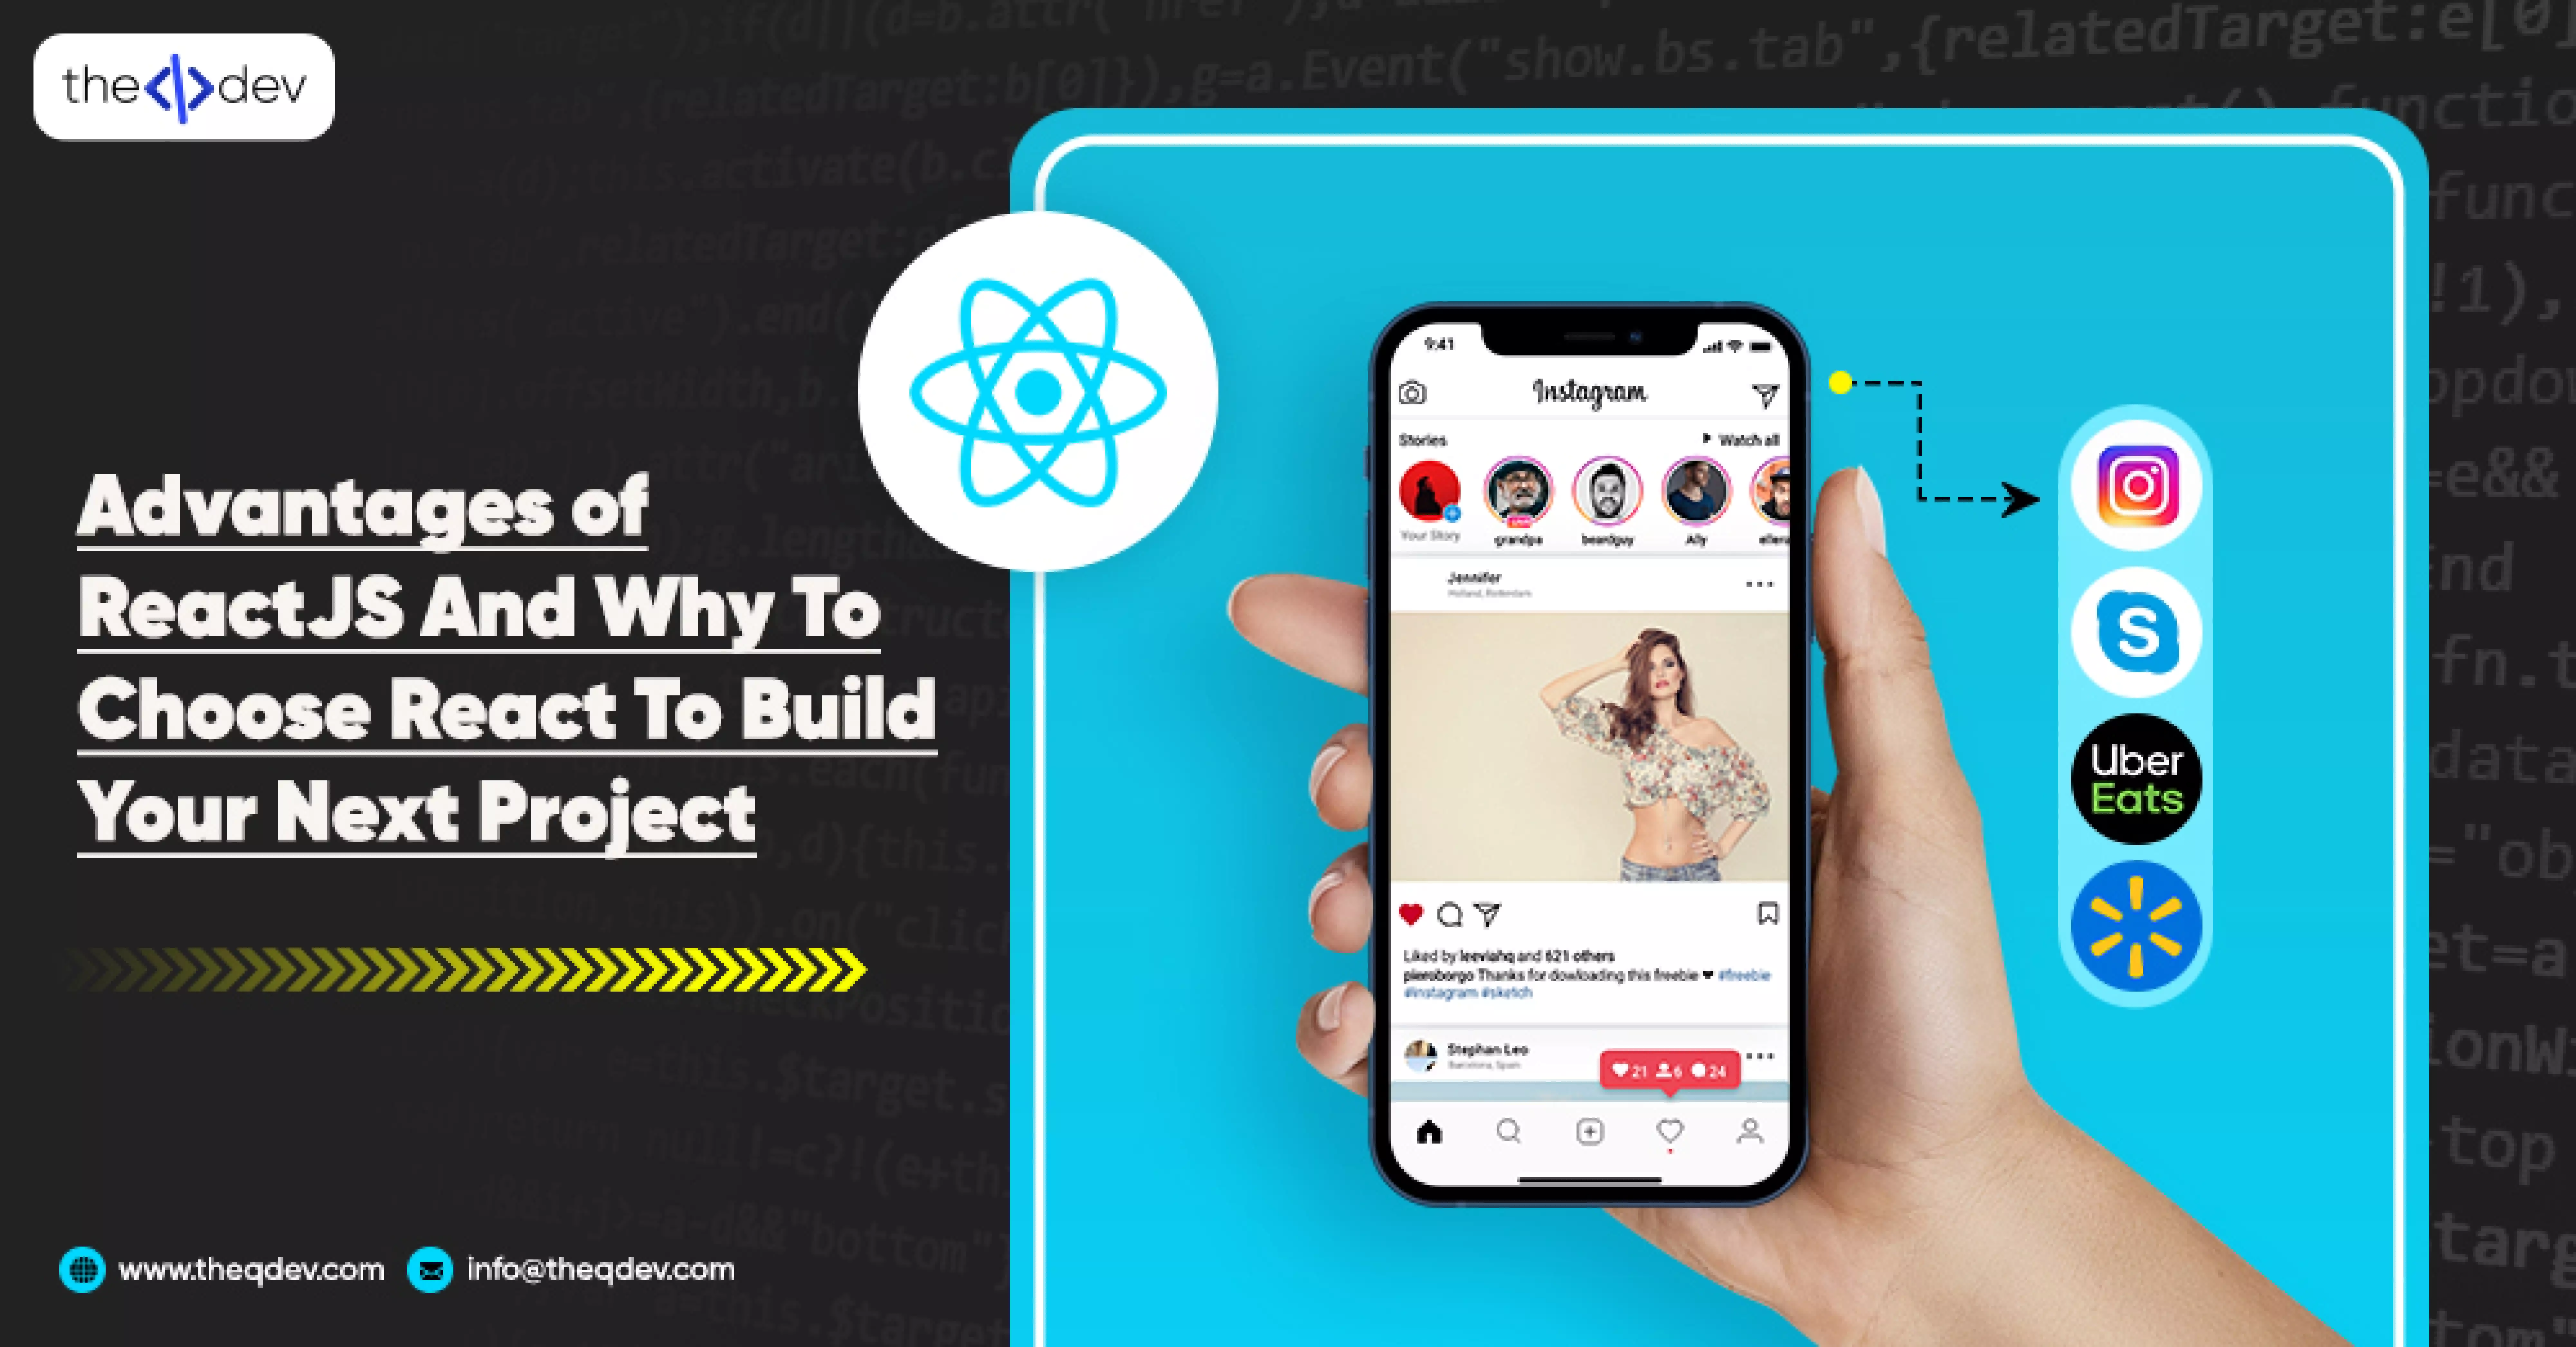 Advantages of ReactJS and why to opt for React for your next project